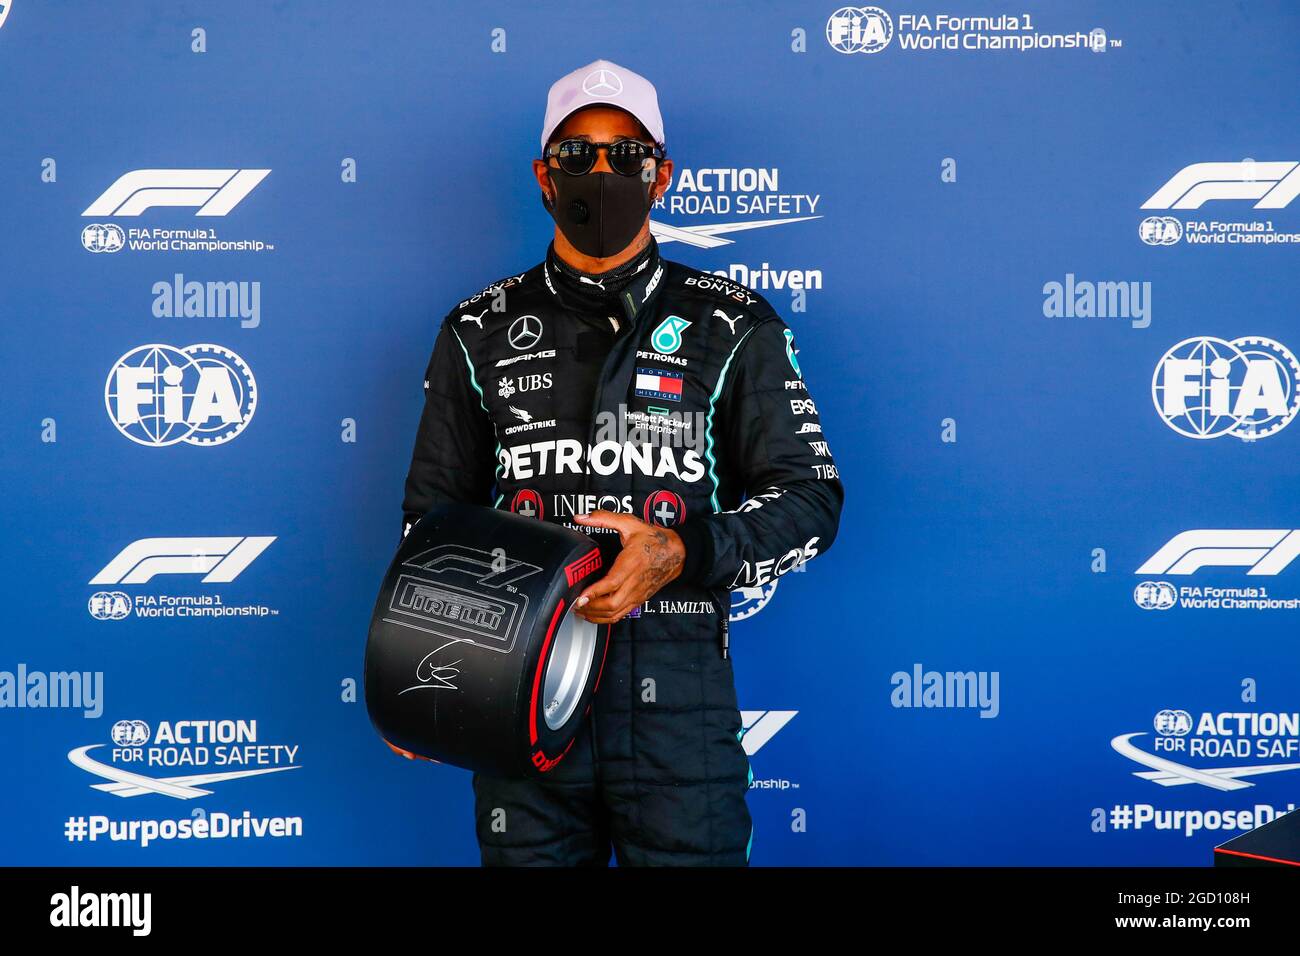 Lewis Hamilton (GBR) Mercedes AMG F1 with the Pirelli Pole position trophy.  Spanish Grand Prix, Saturday 15th August 2020. Barcelona, Spain. FIA Pool  Image for Editorial Use Only Stock Photo - Alamy